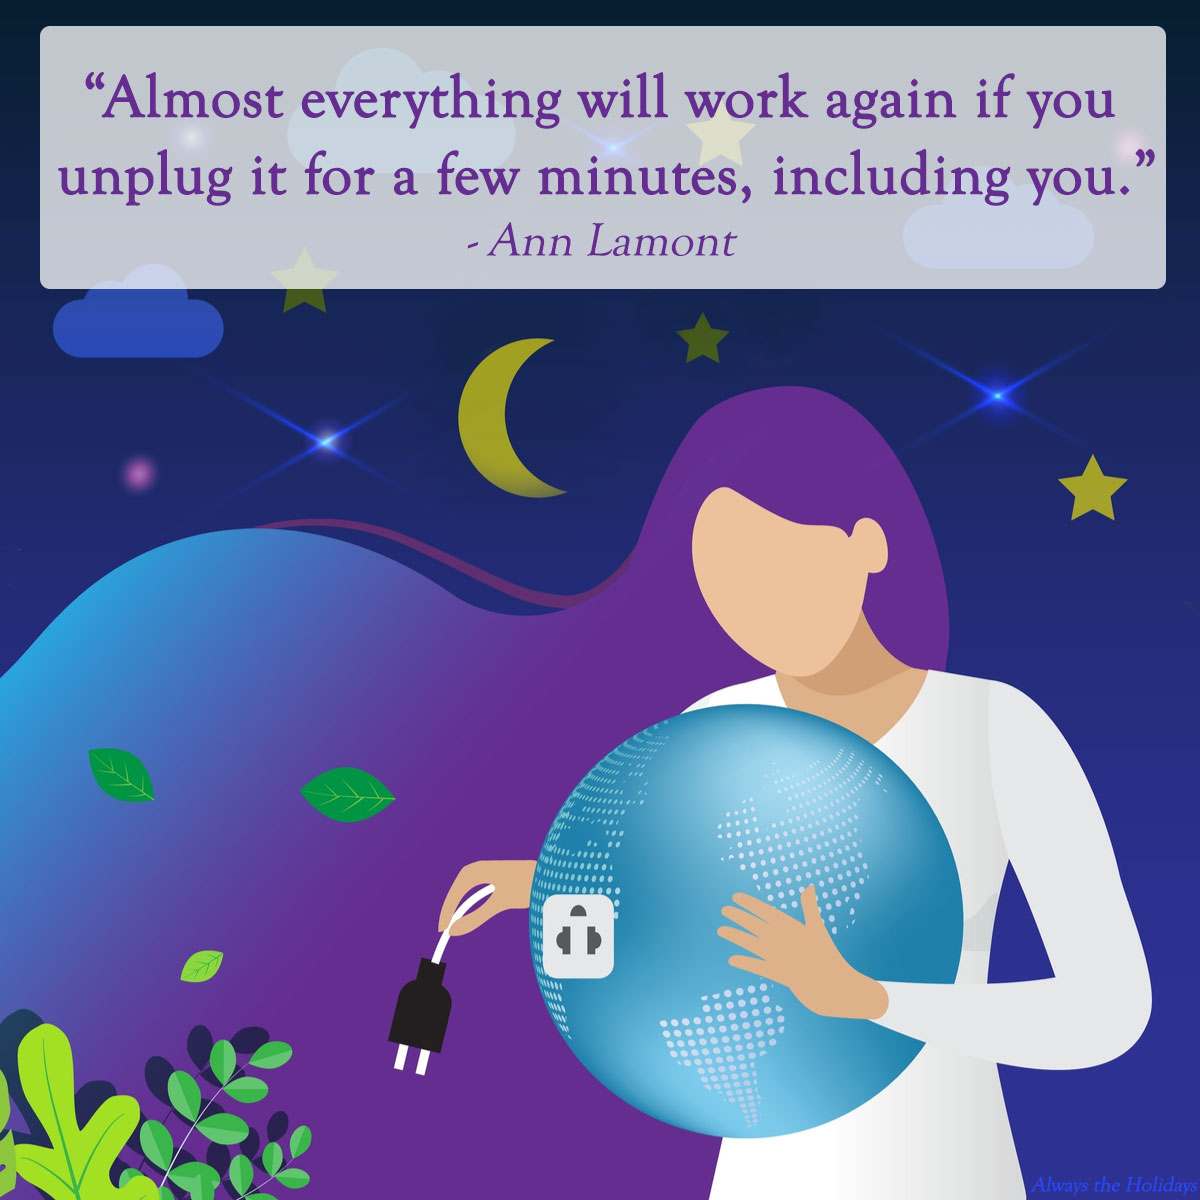 A mother quotes inspirational text overlay above a woman with purple hair unplugging the earth, while surrounded by stars, the moon, leaves and clouds.